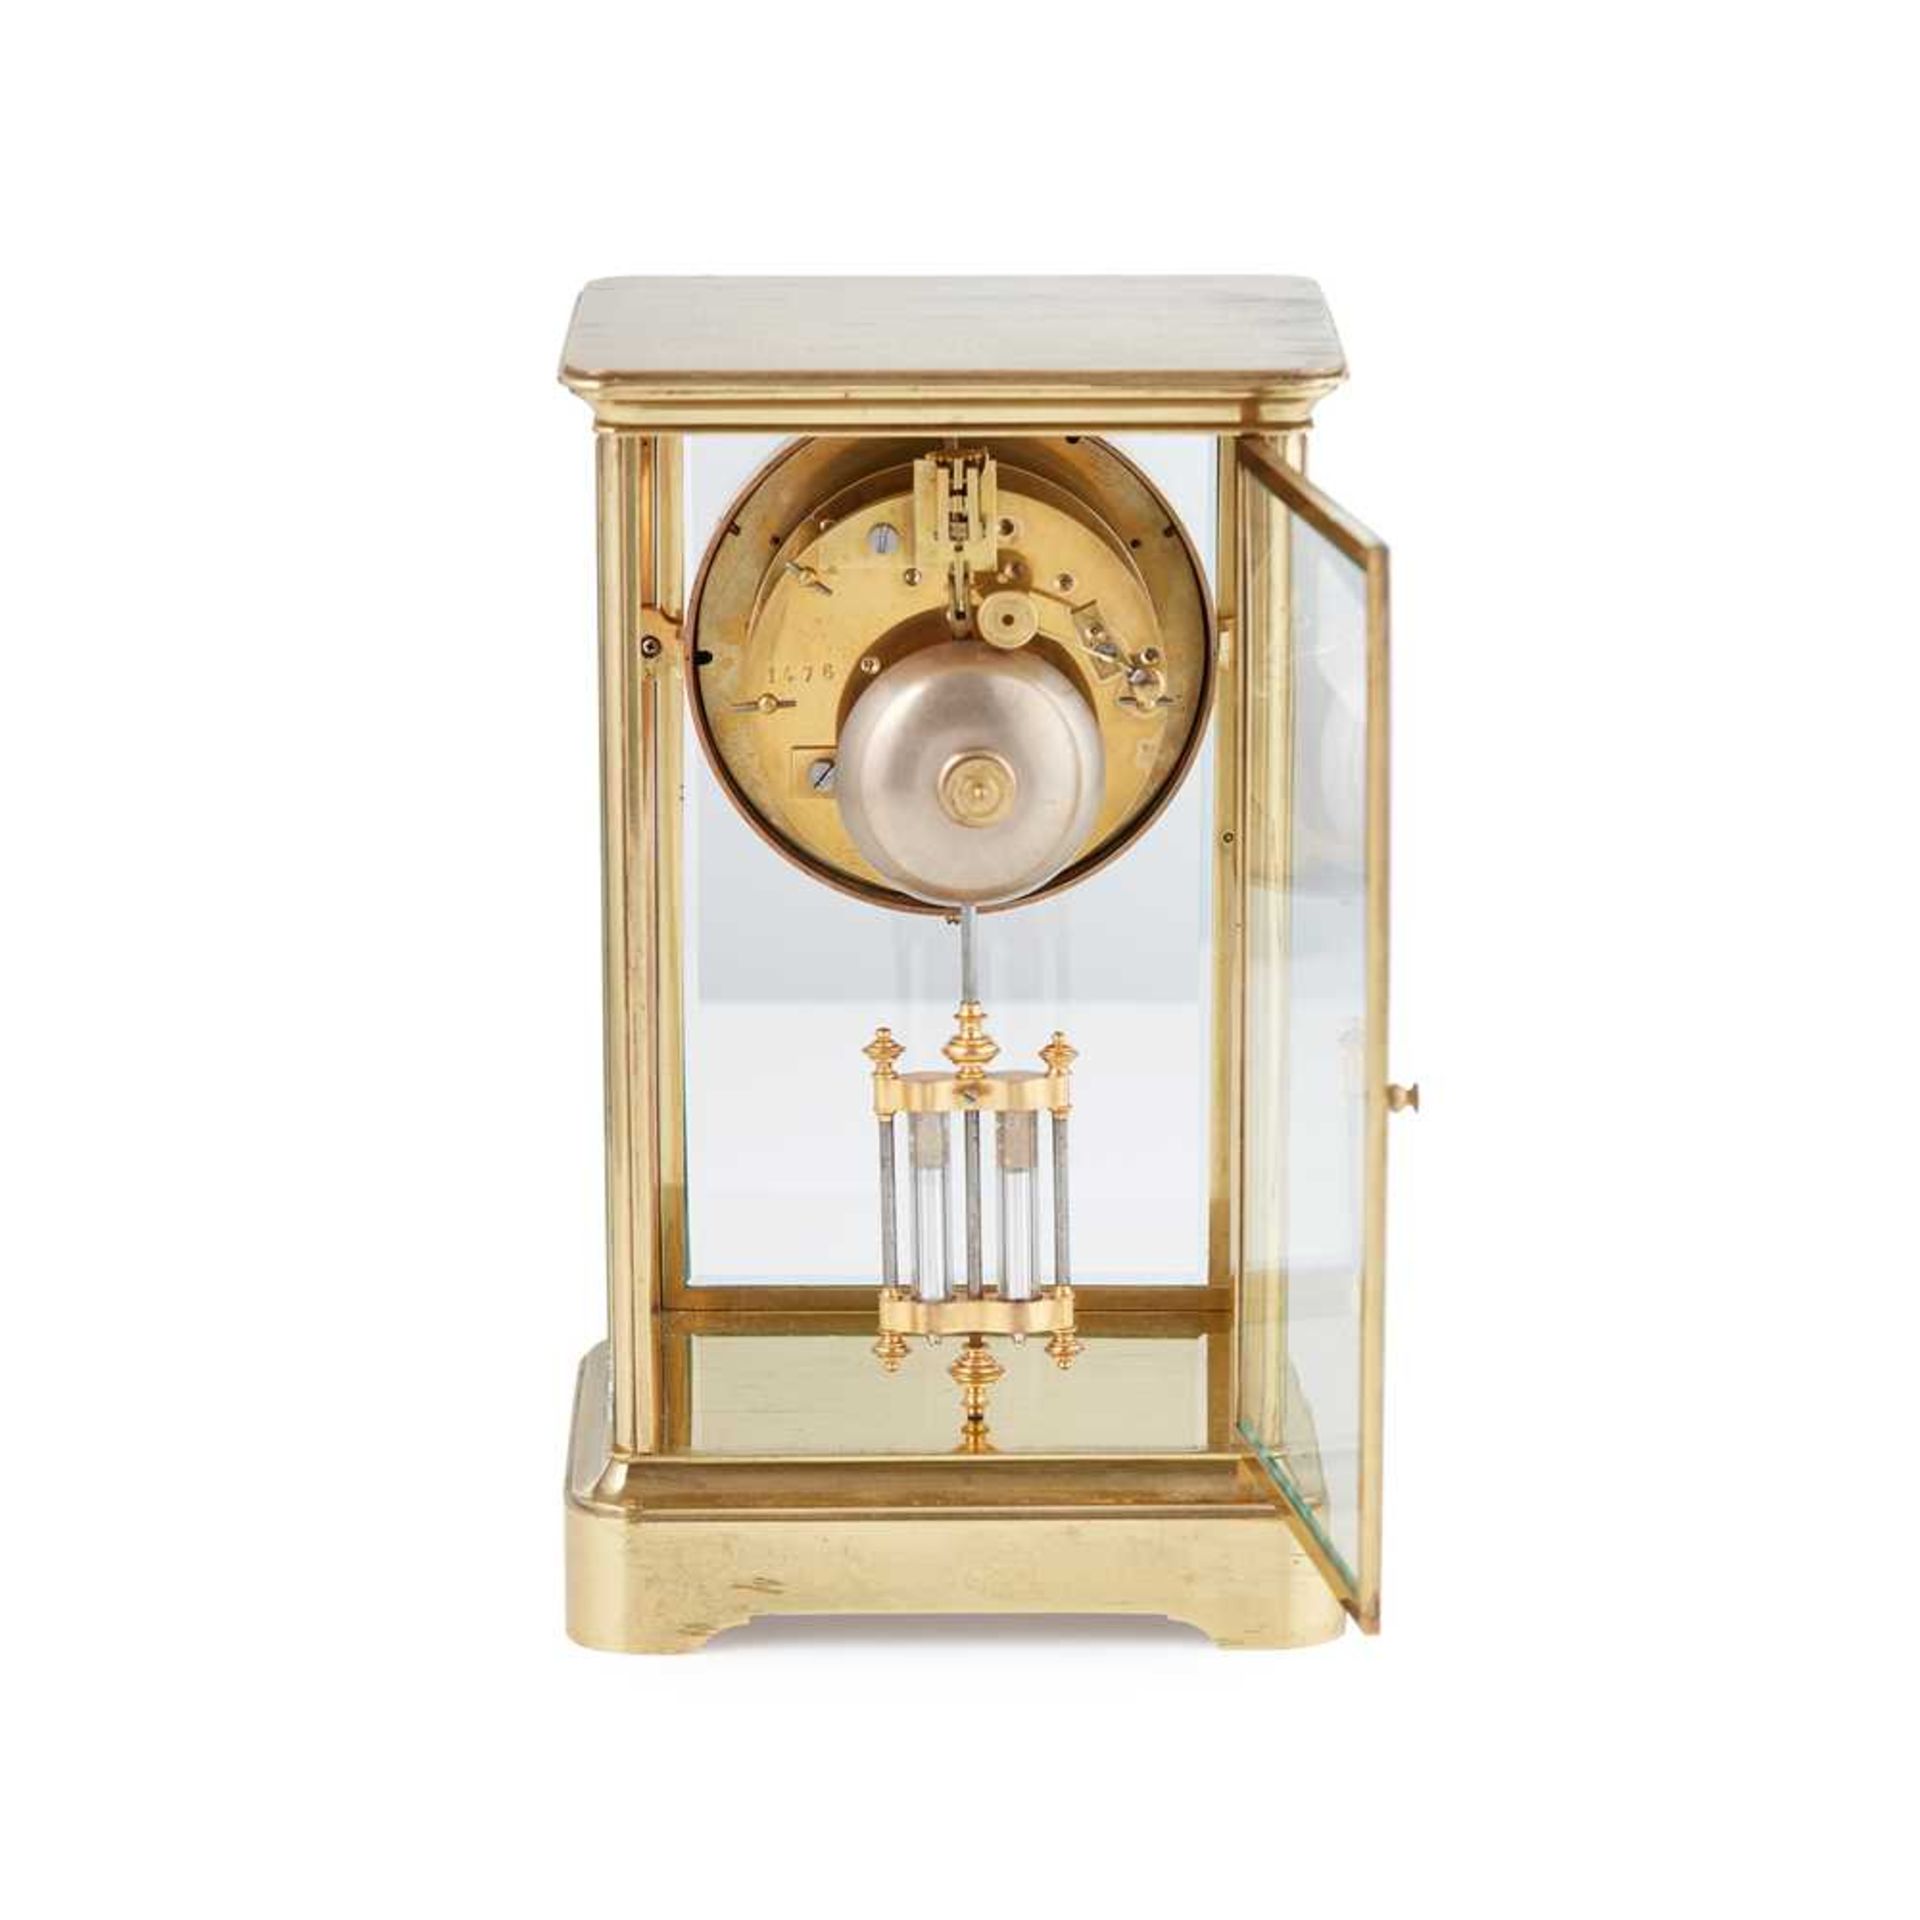 FRENCH BRASS FOUR GLASS MANTEL CLOCK, JAPY FRÈRES & CO. 19TH CENTURY - Image 3 of 10